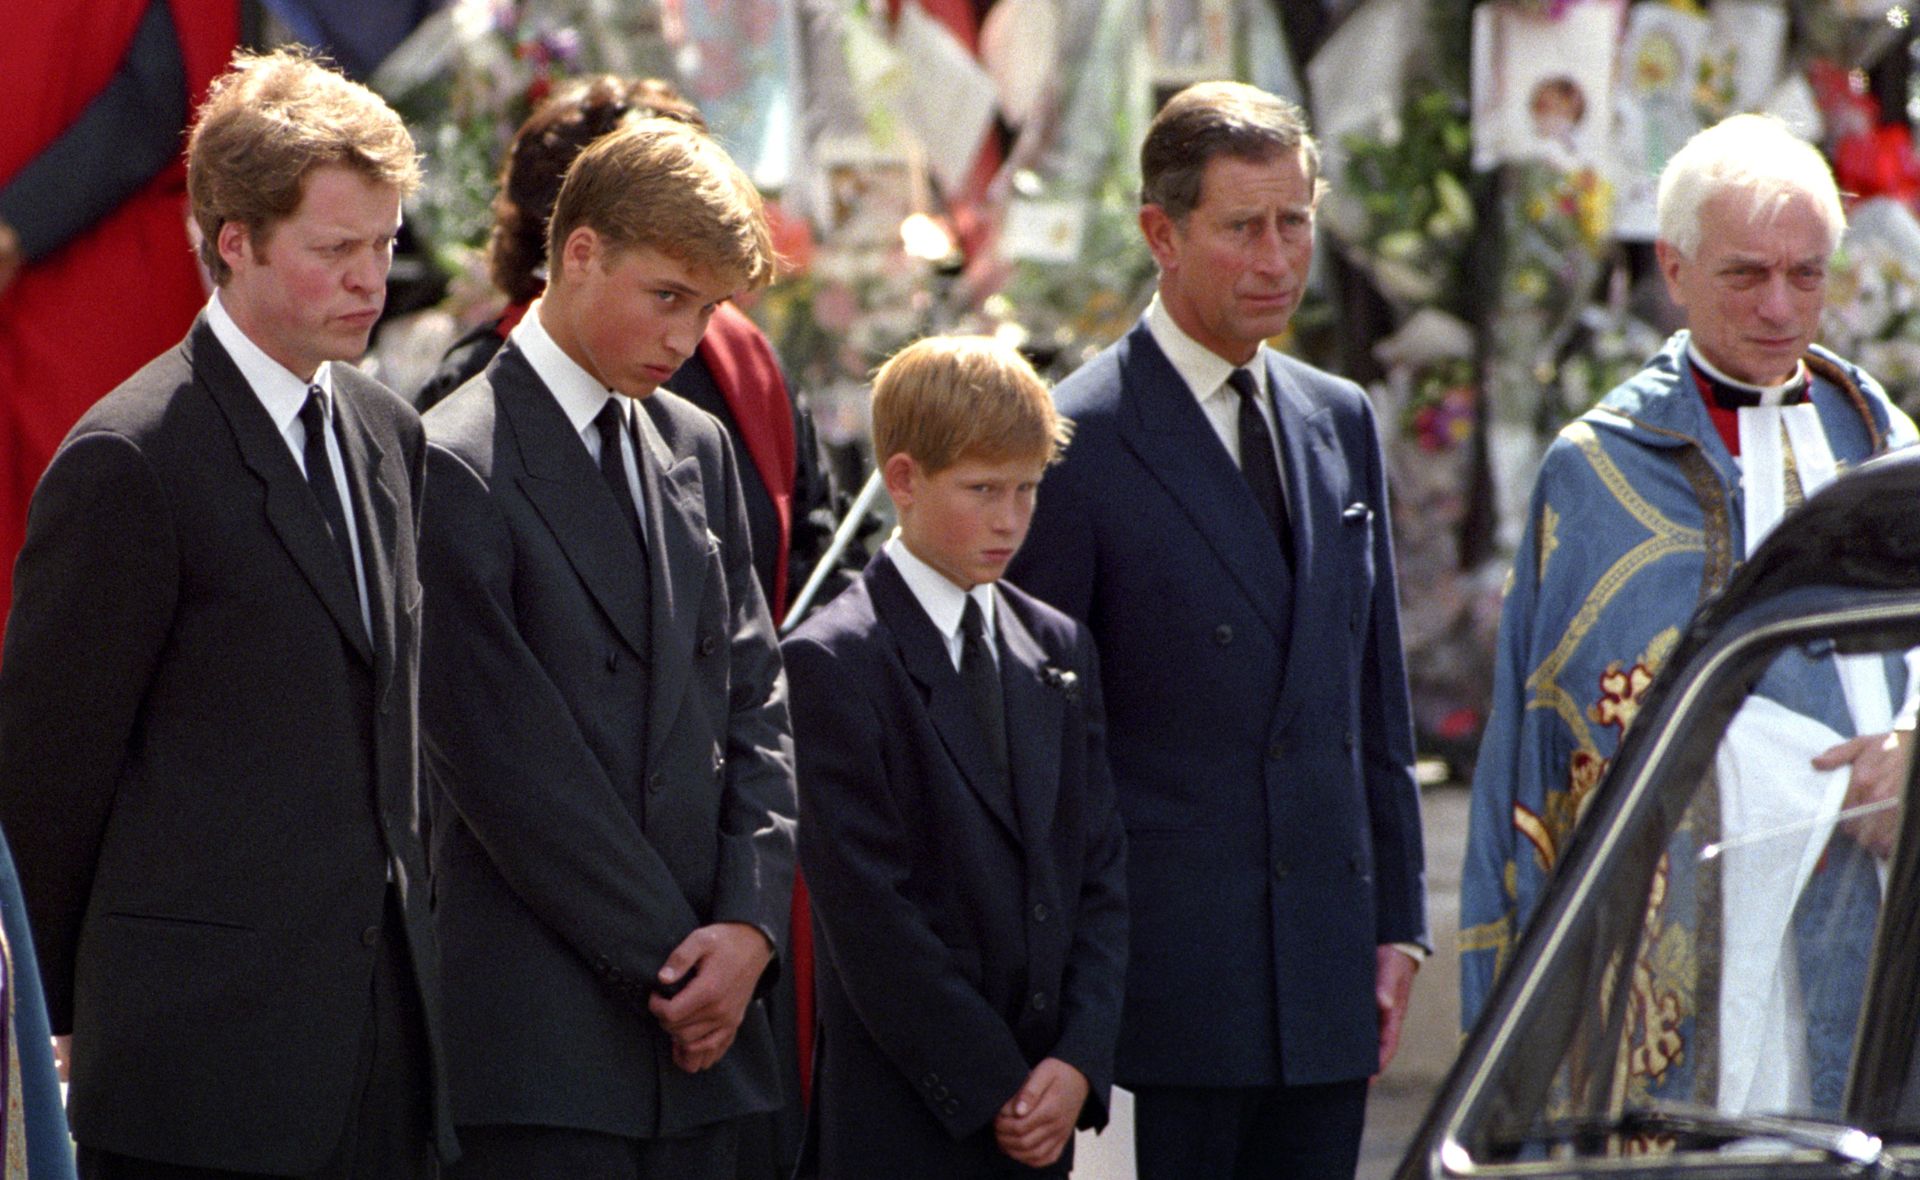 The striking similarity between The Queen and Princess Diana’s emotional funerals